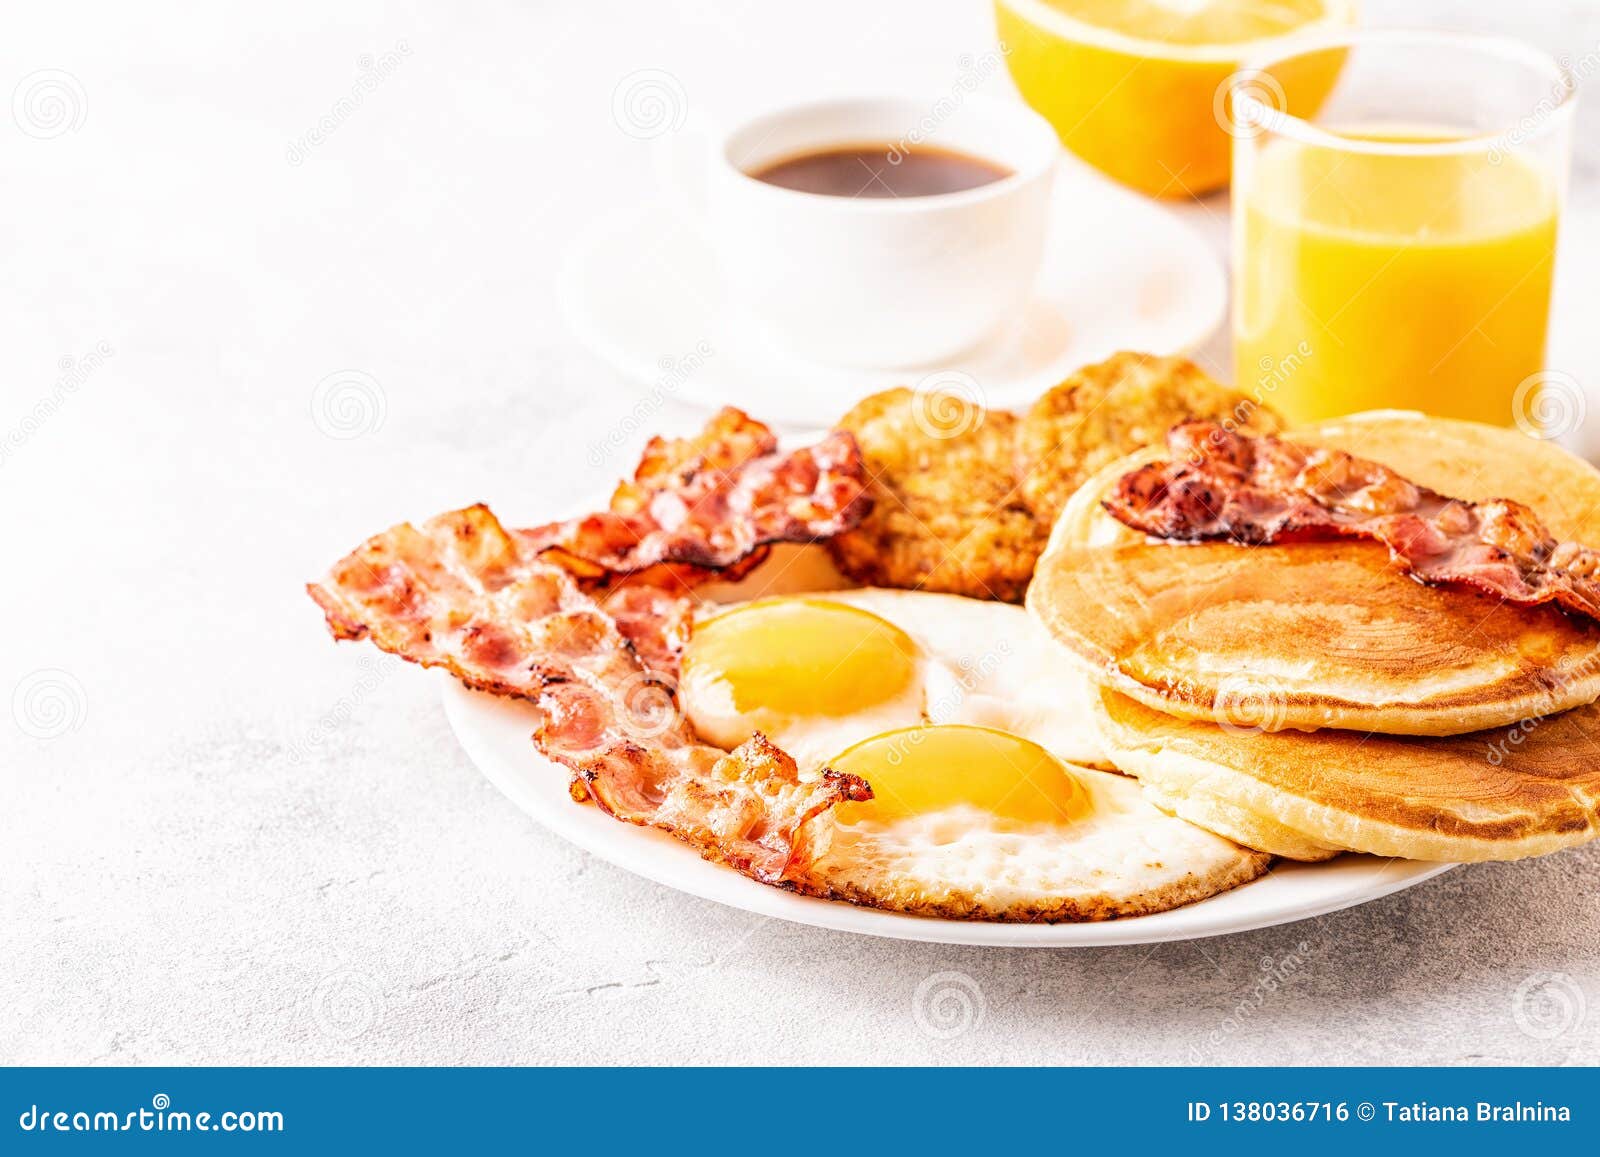 Healthy Full American Breakfast with Eggs Bacon Pancakes and Latkes ...